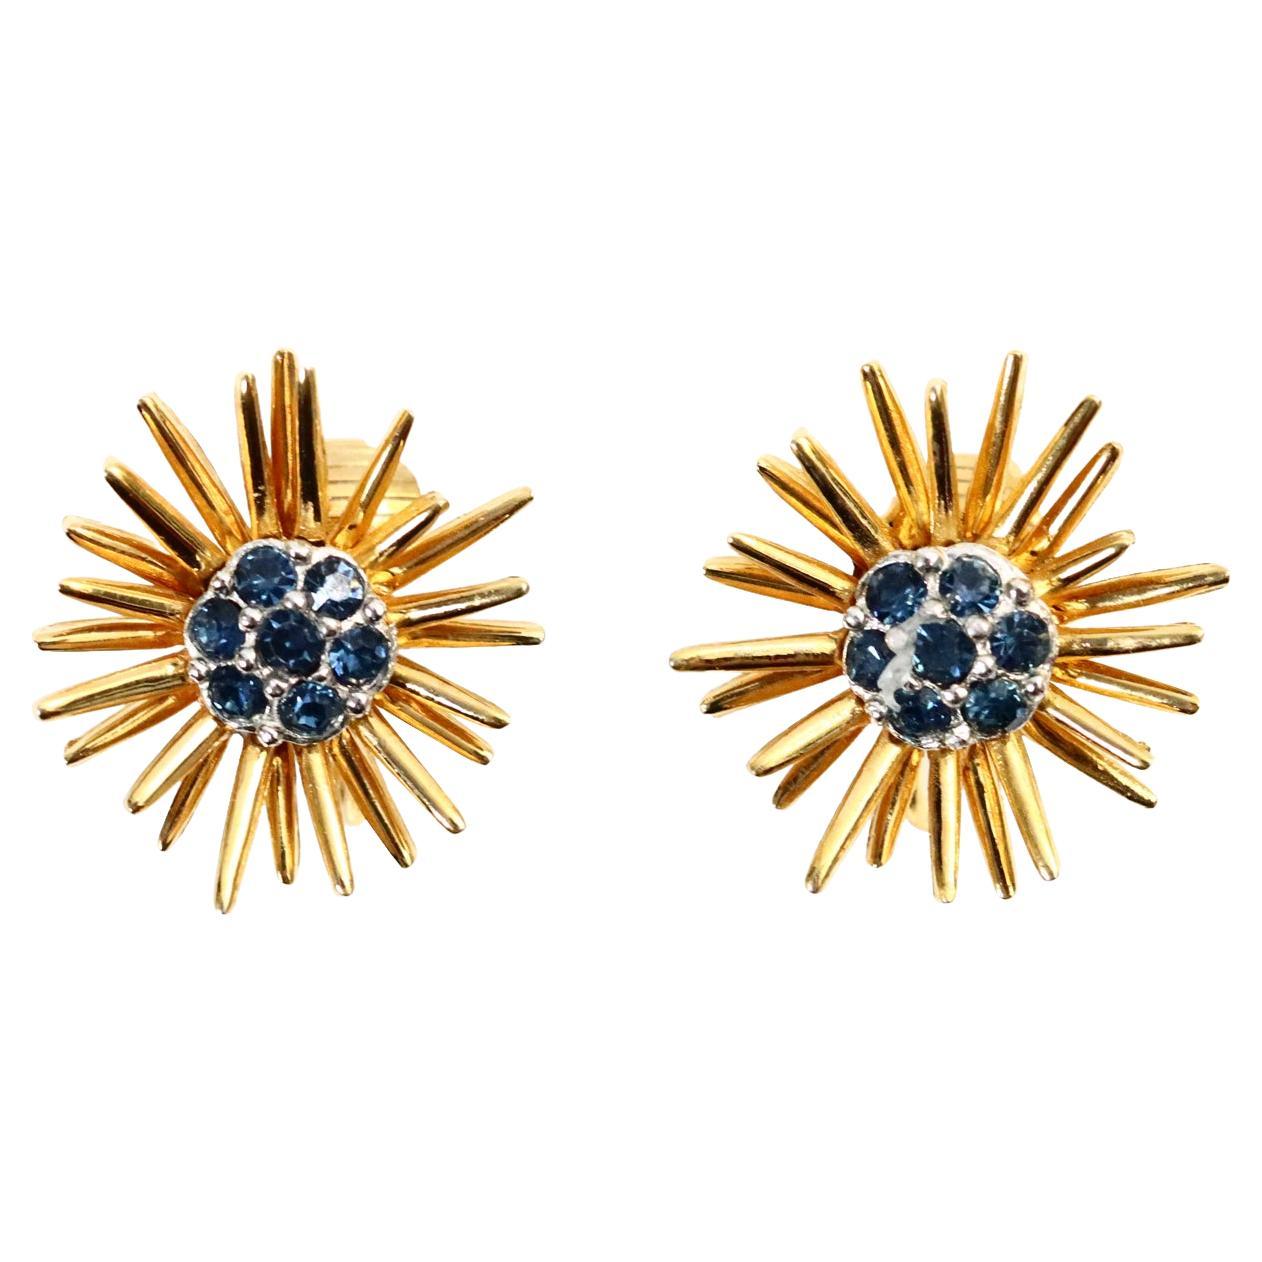 Vintage D'orlan Gold Starburst with Blue Diamante Earrings Circa 1980s For Sale